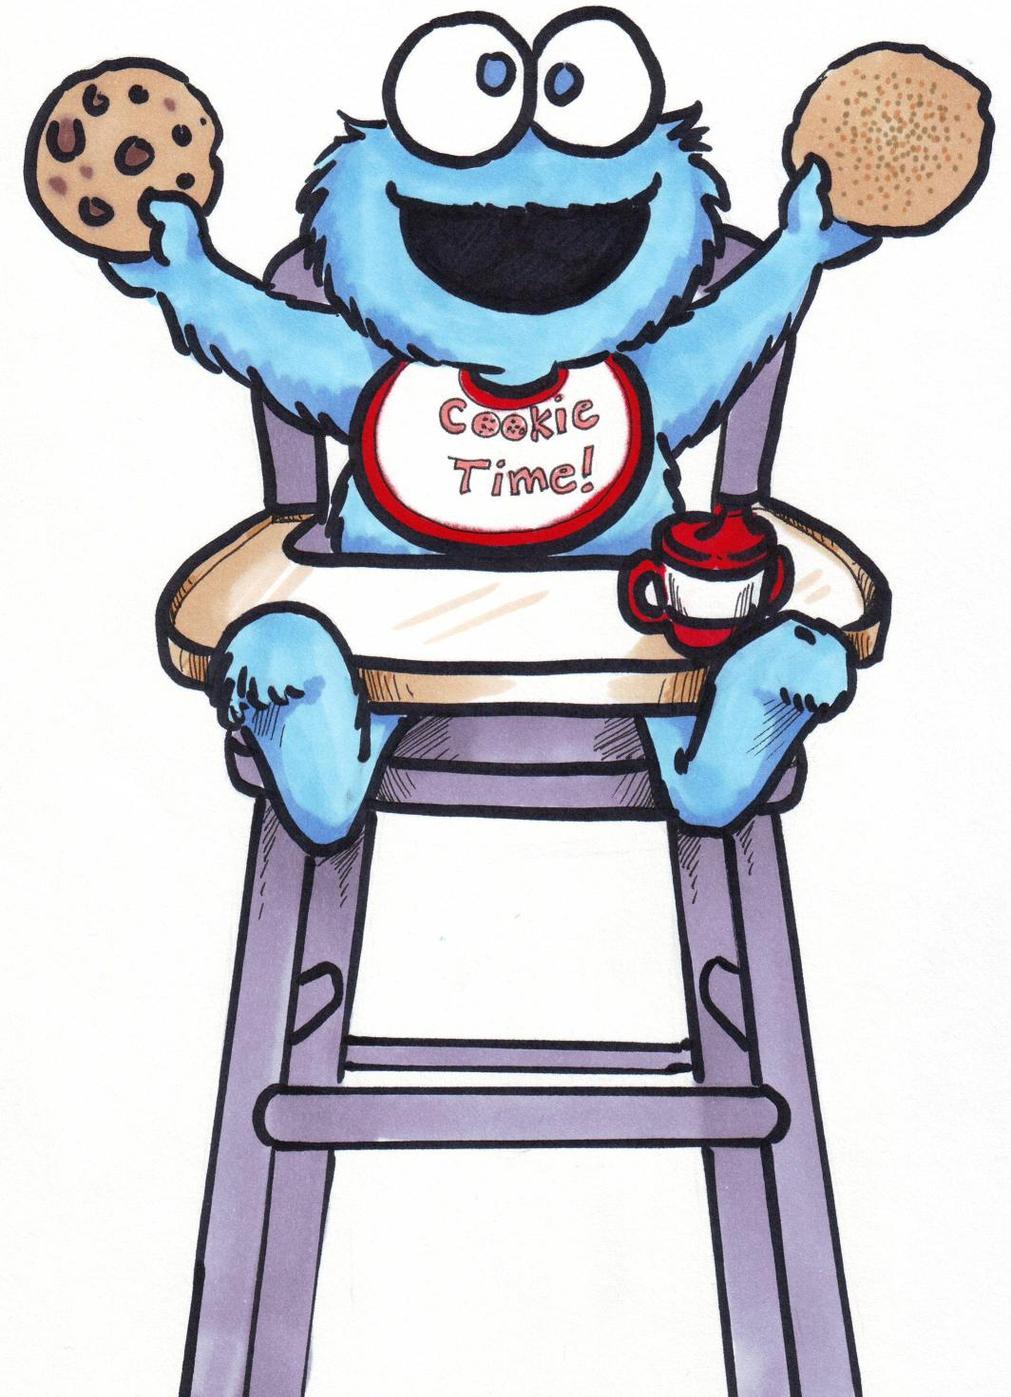 Cookie monster cartoon clipart free to use clip art resource